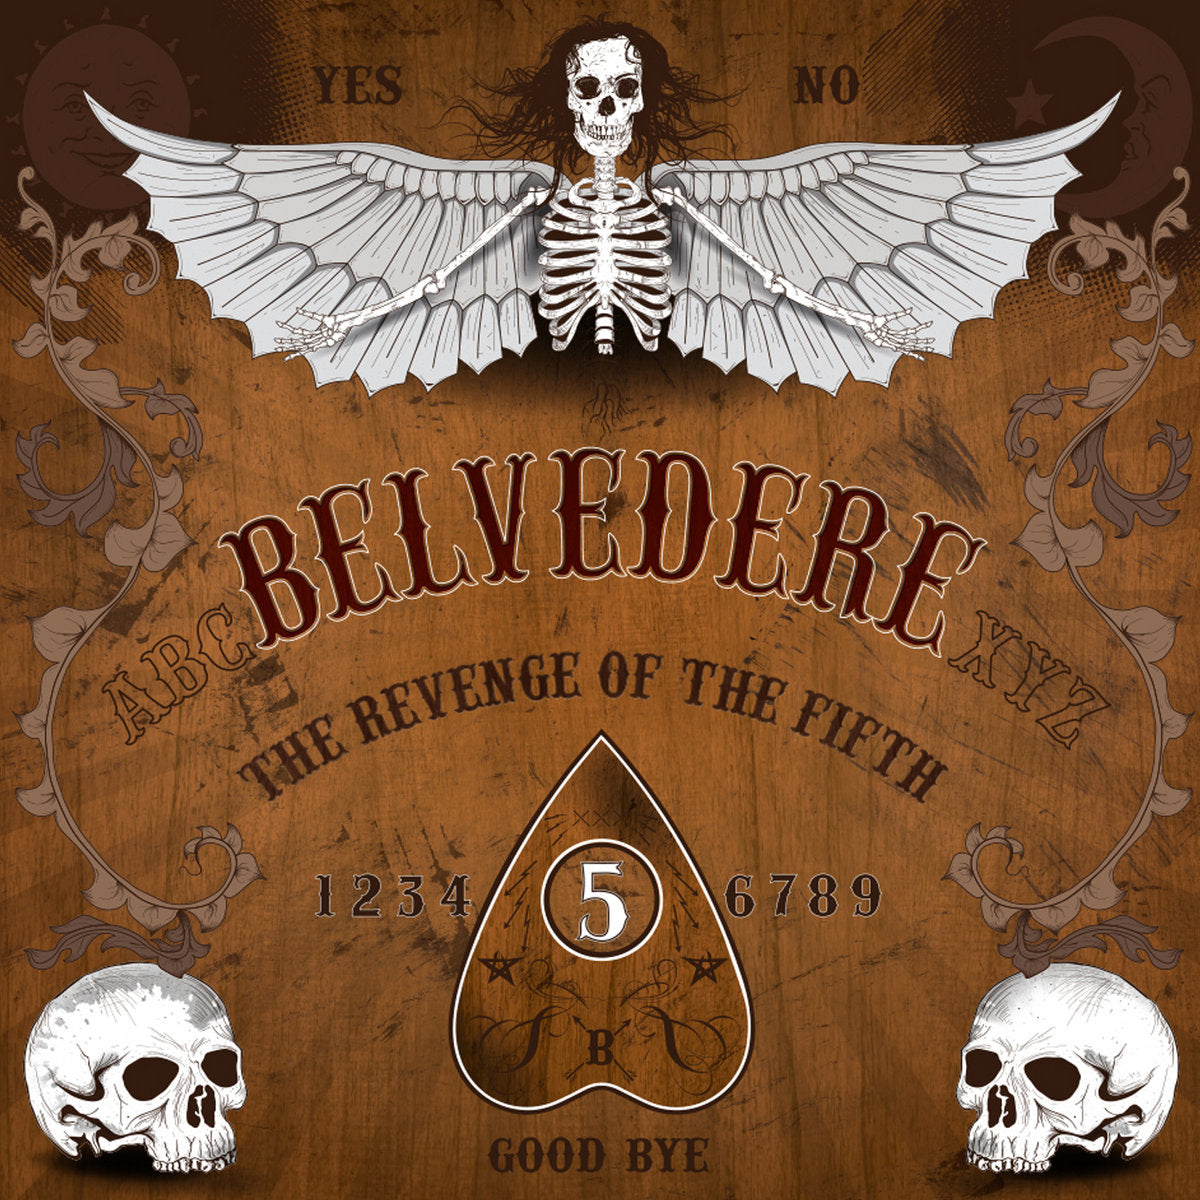 Belvedere - The Revenge of the Fifth